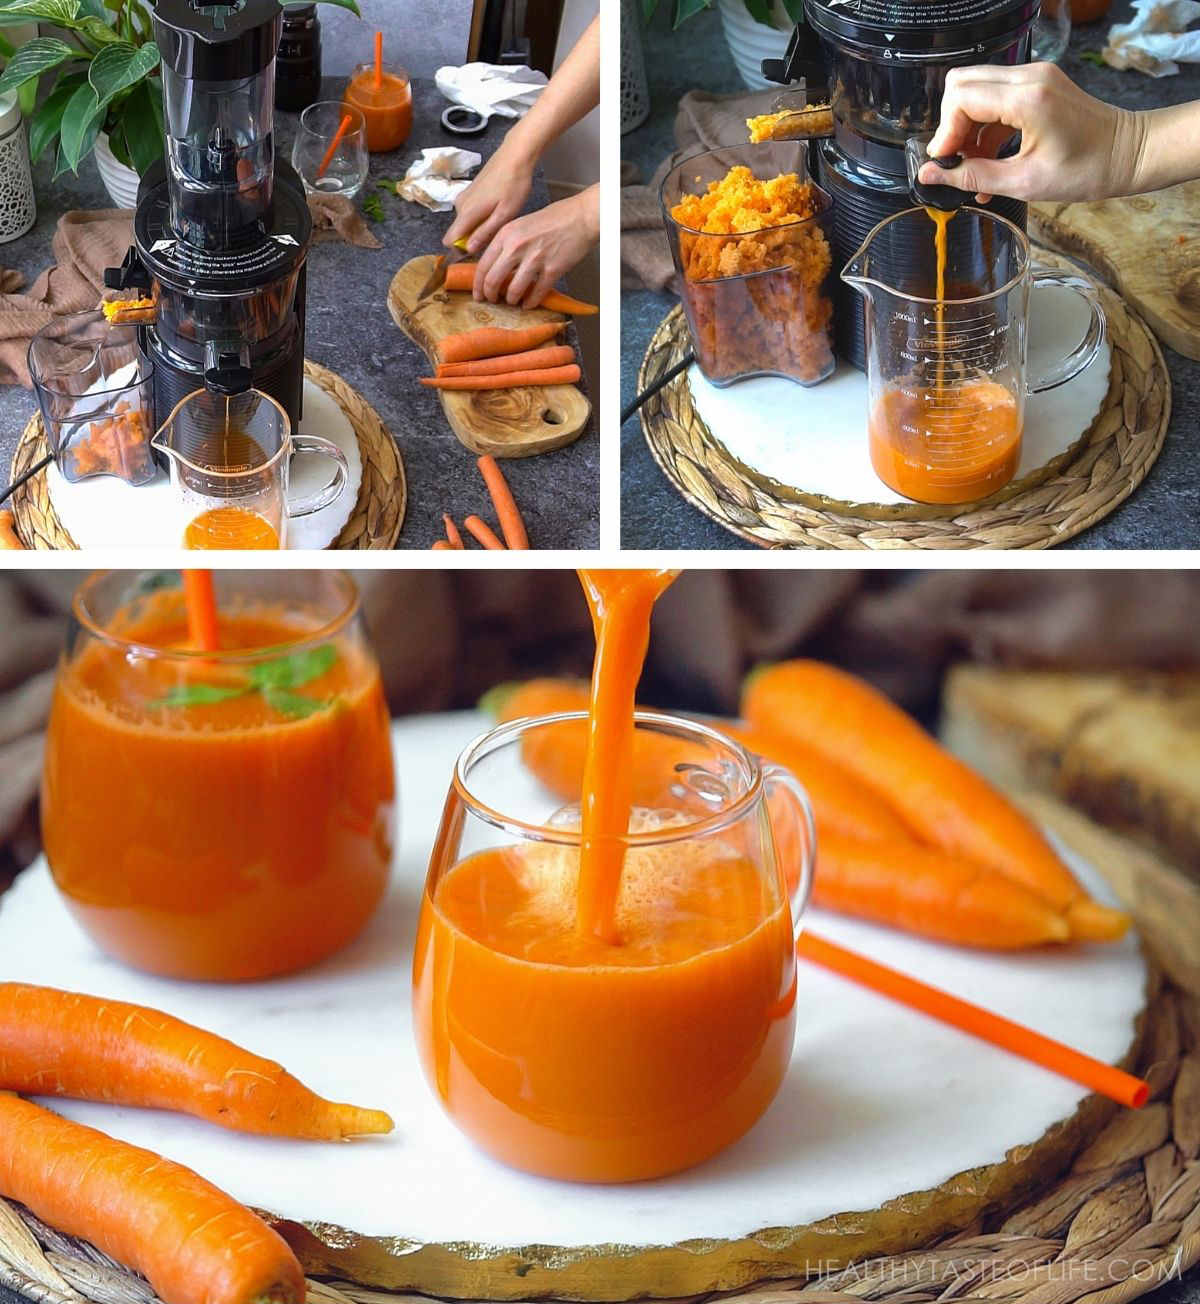 Process shots showing how to make carrot juice with a masticating juicer, and what's the best carrot juicer (best juicer for carrots). Carrot juicer recipe.